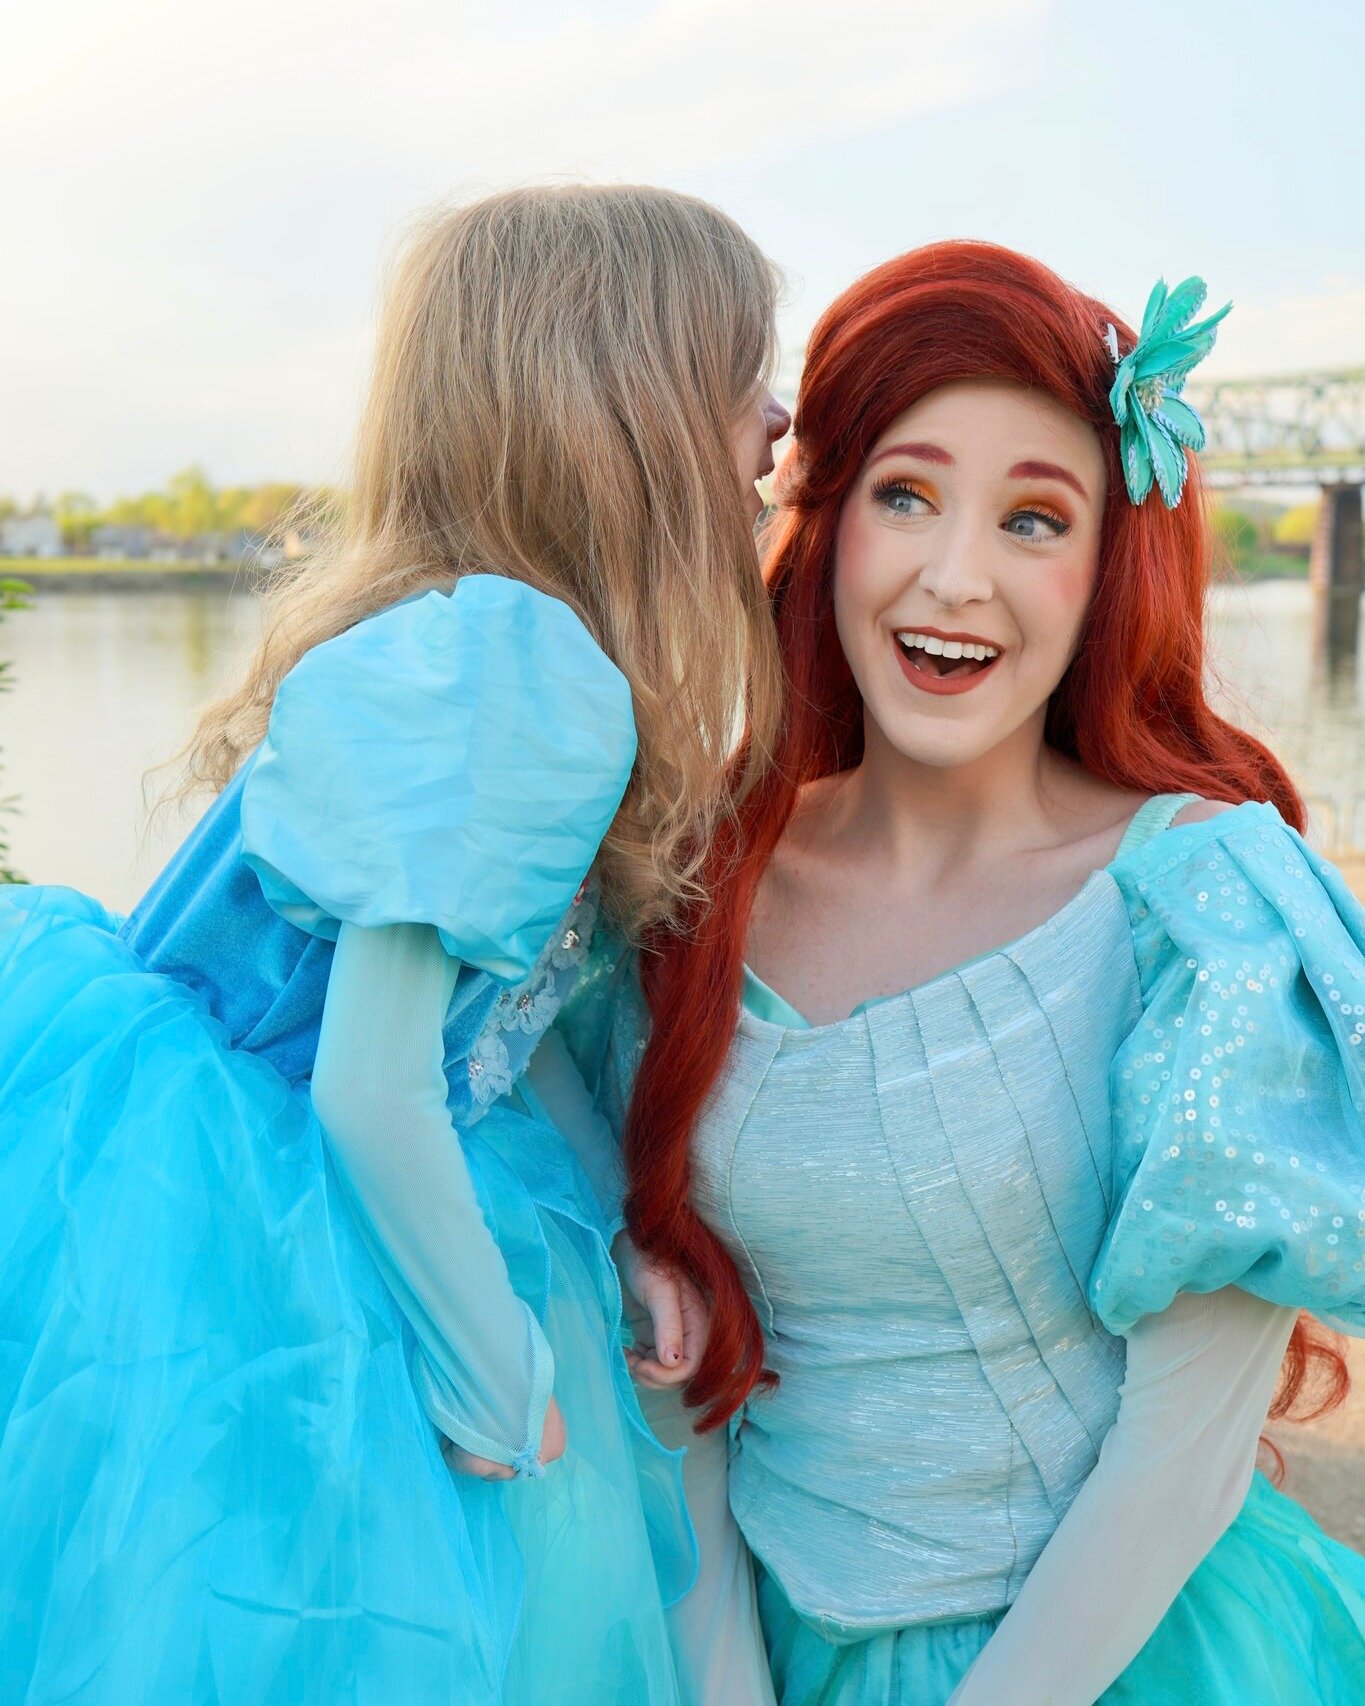 Have you heard the news? We're teaming up with Live Your Dream Princess Events to bring this adorable mini session to the Mid Ohio Valley! Meet Ariel, get priceless photos...YES!!! There are only a couple of spots left, find out all the details and b